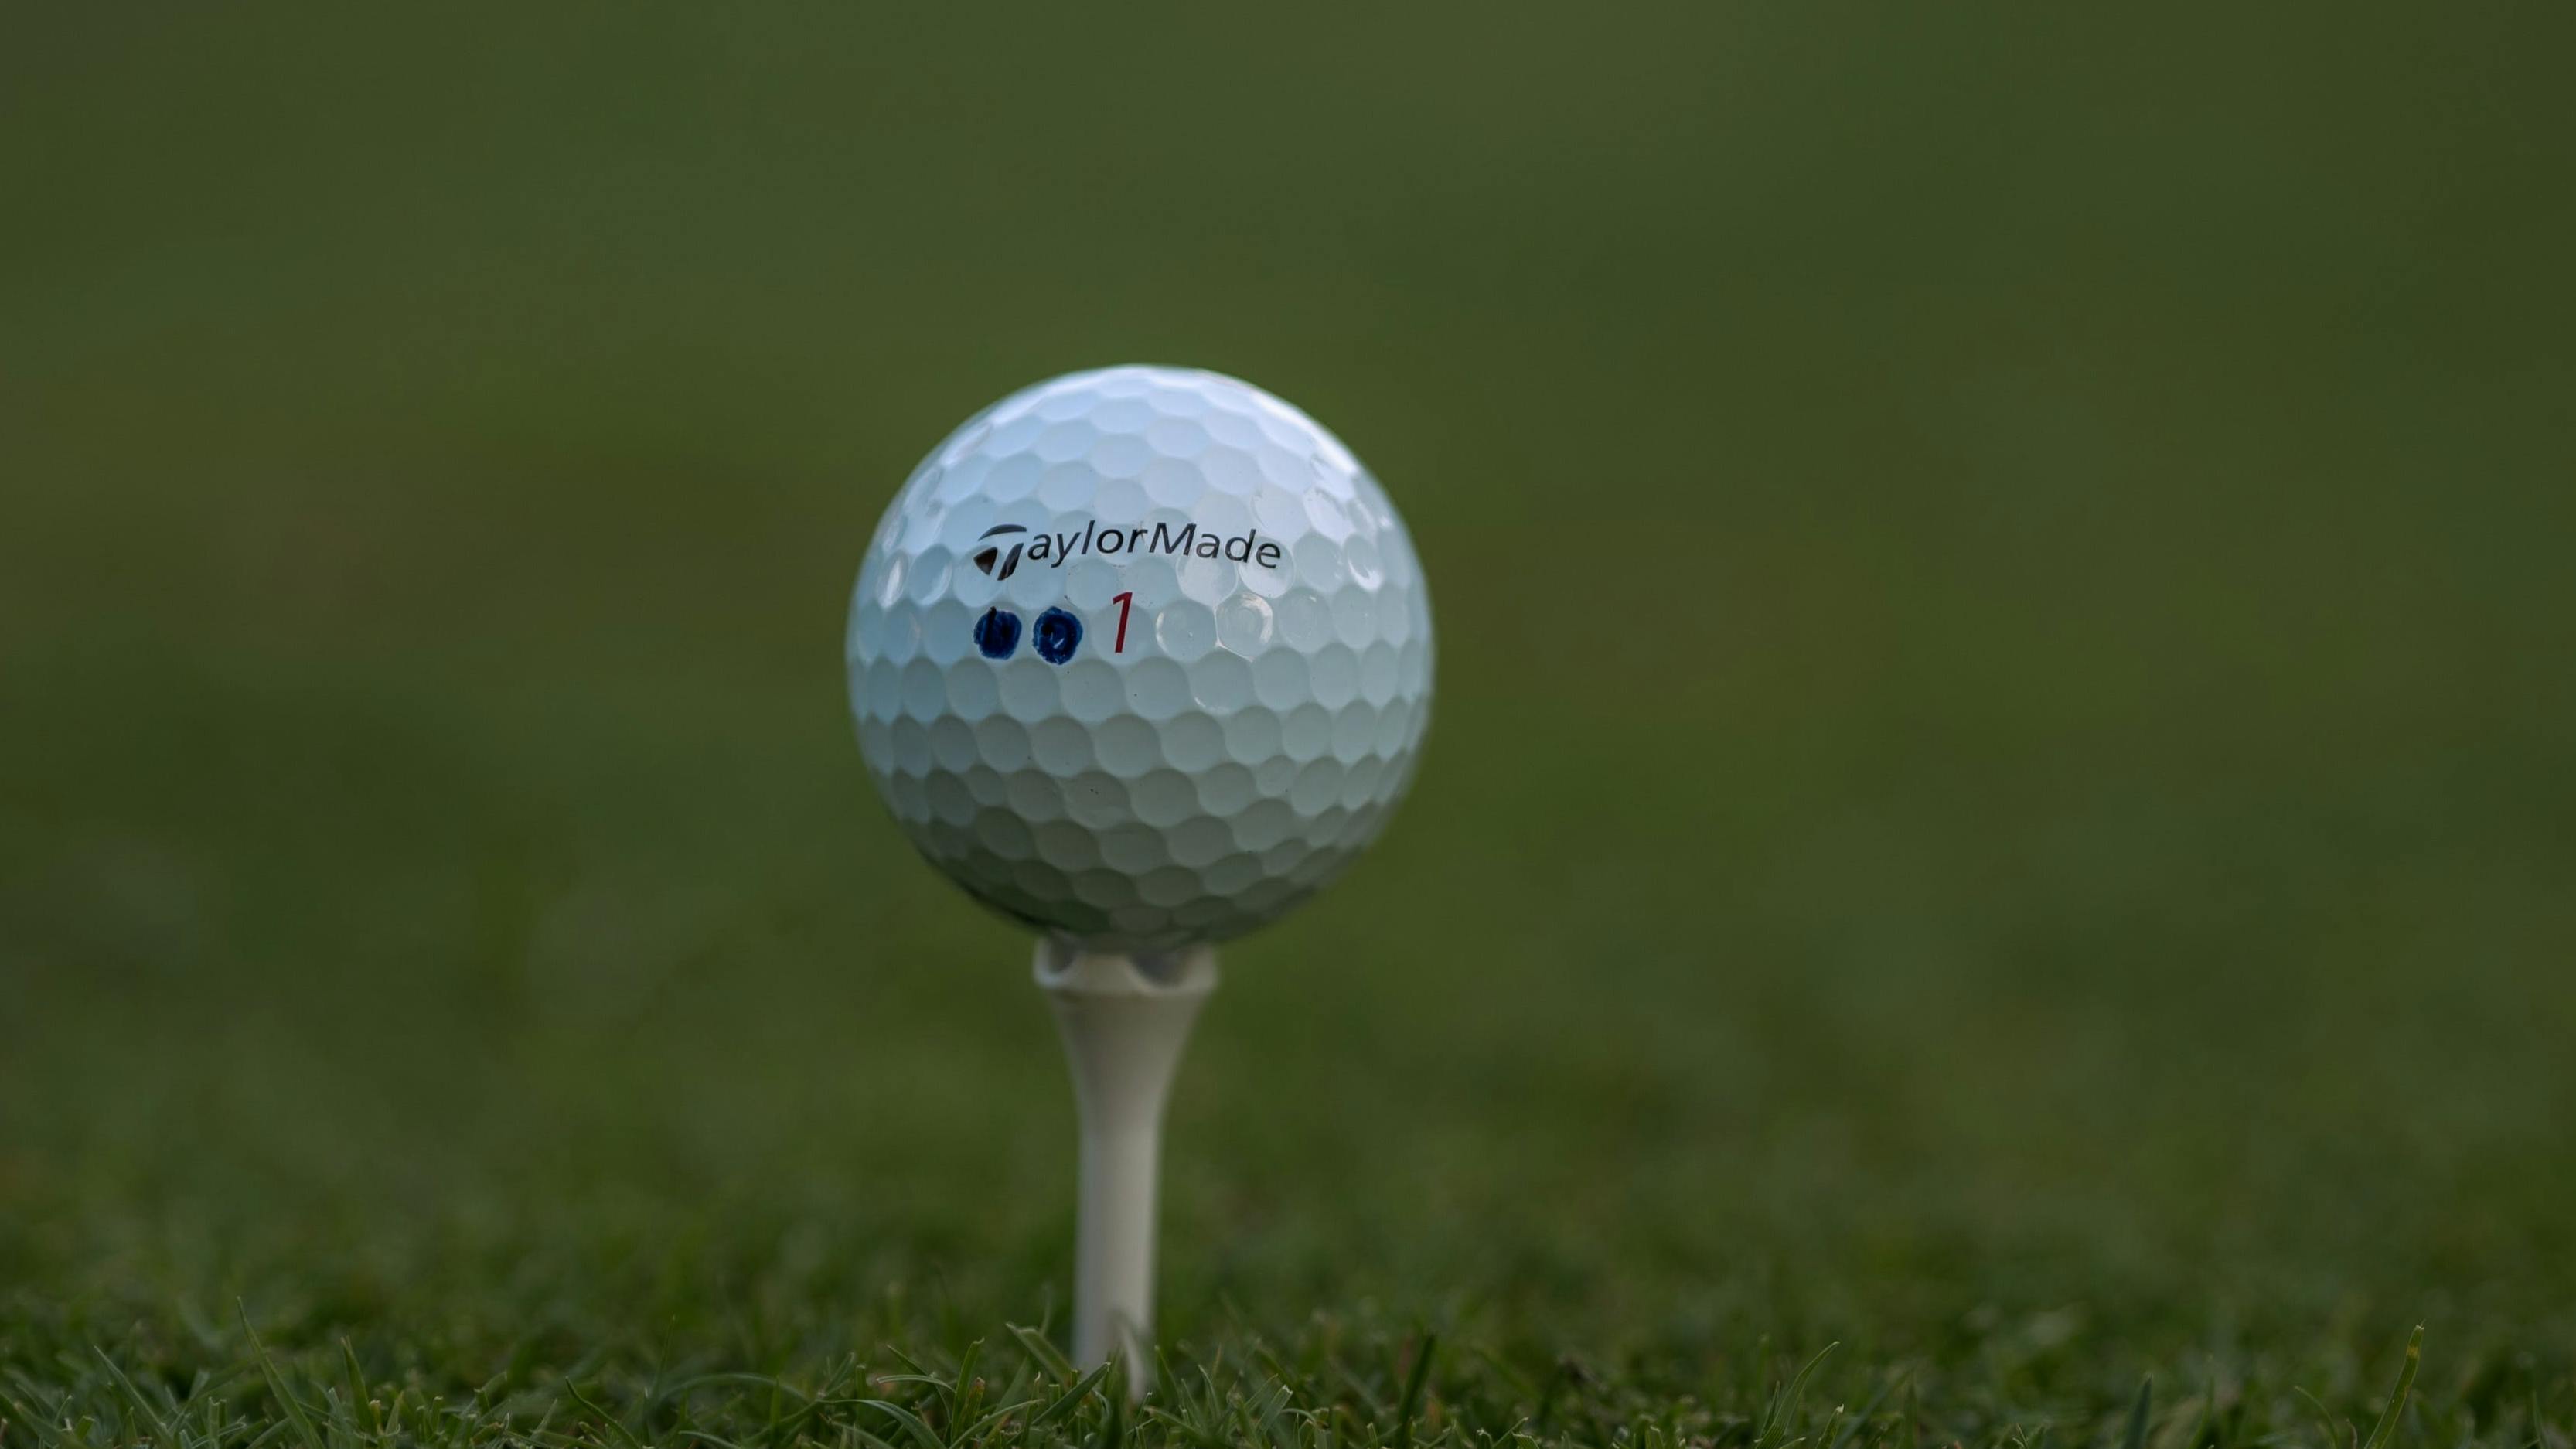 Taylormade Golf Ball on a tee.